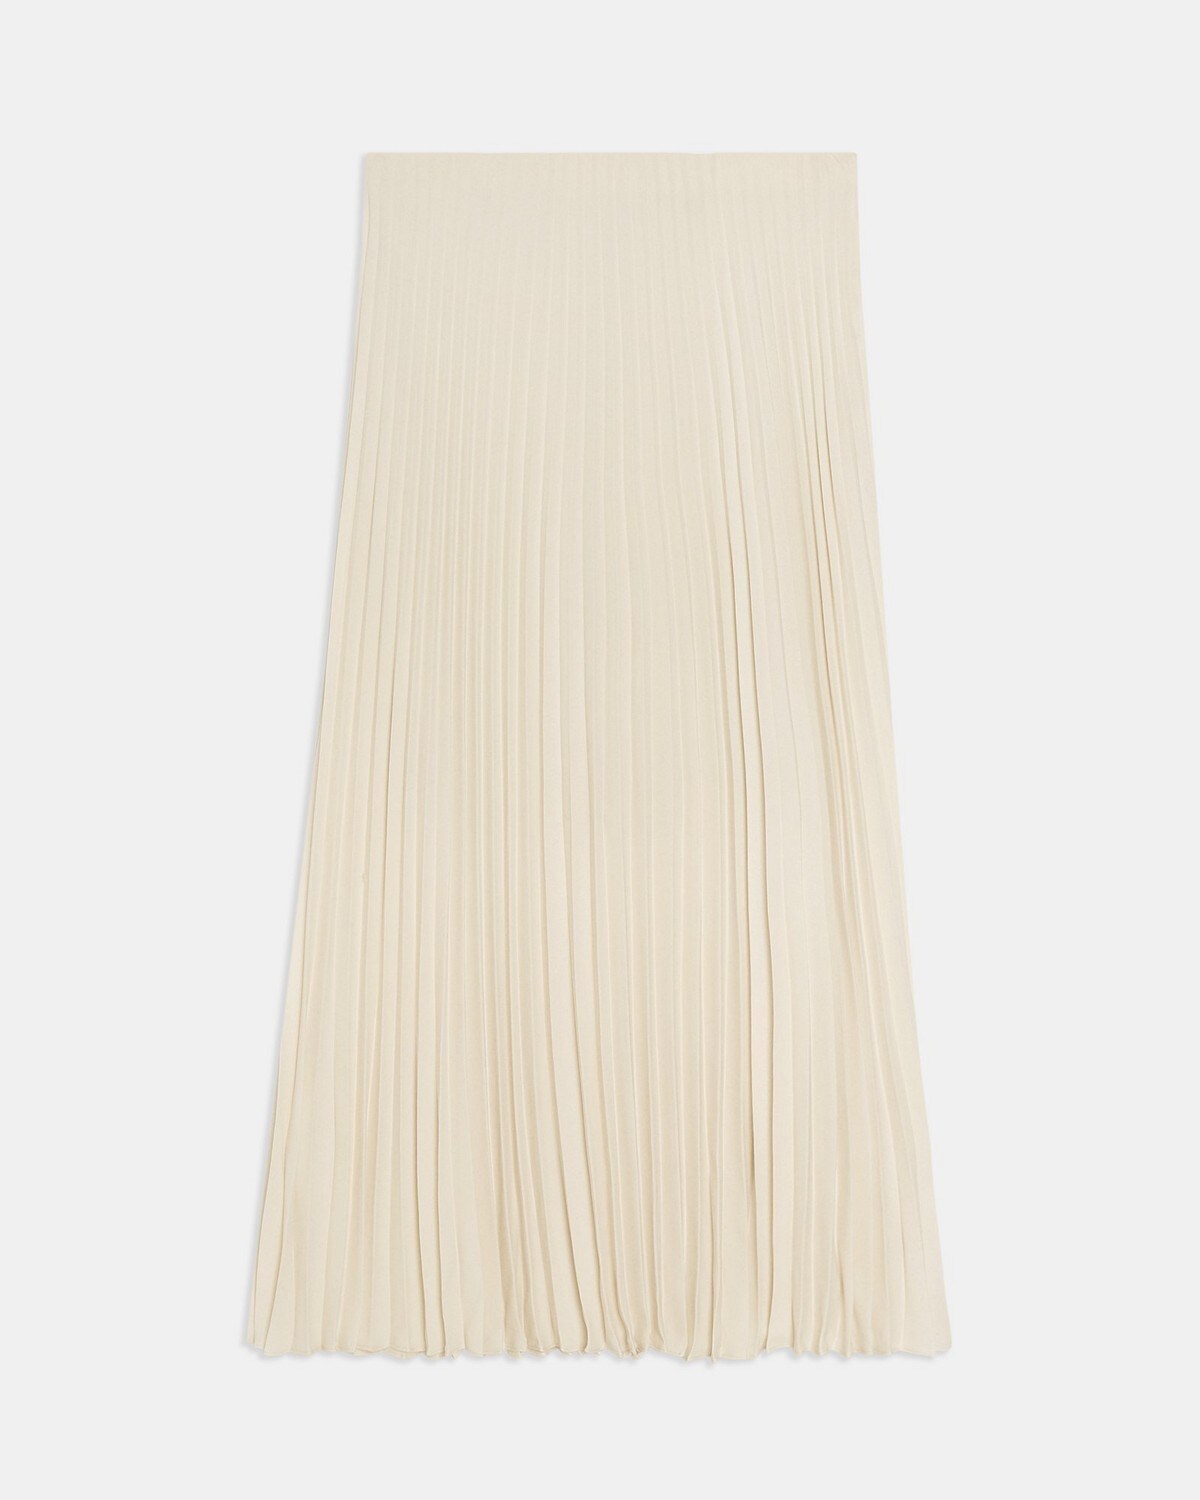 Layered Pleat Skirt in Recycled Georgette